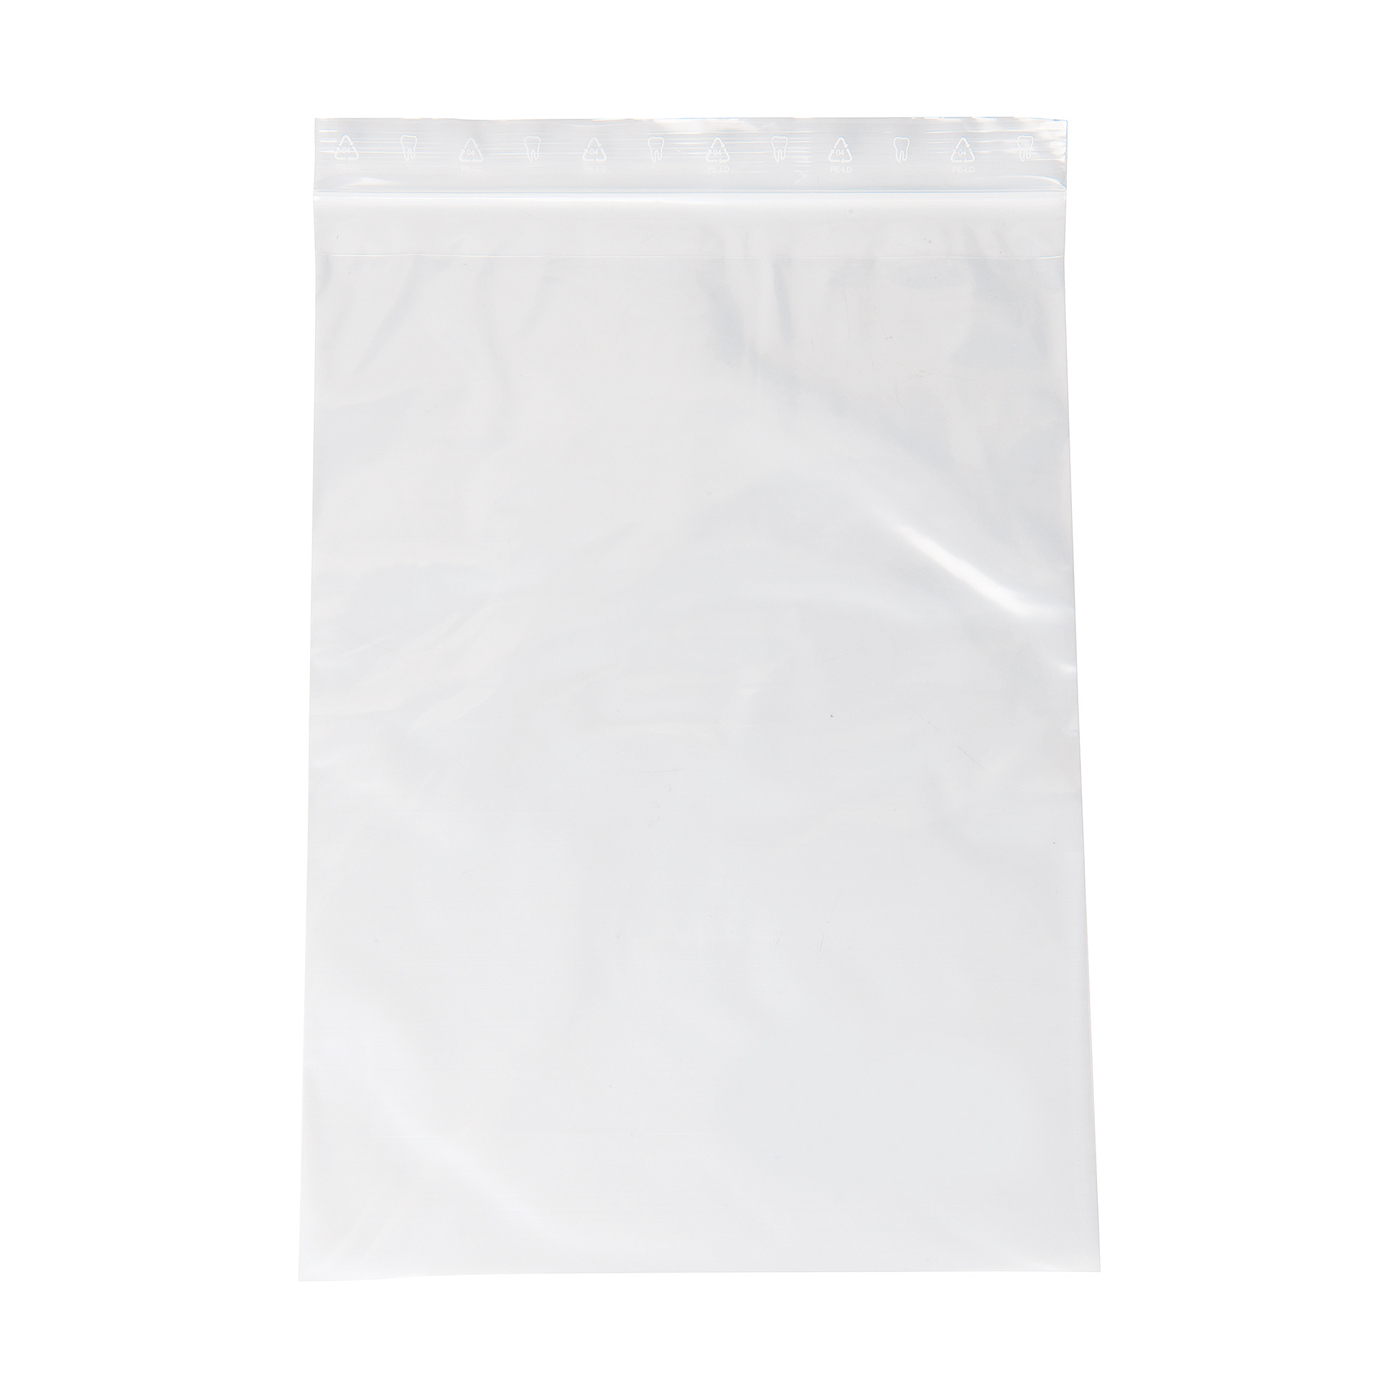 FINO Zip Lock Bags, with Work Pouch, 180 x 250 mm - 1000 pieces